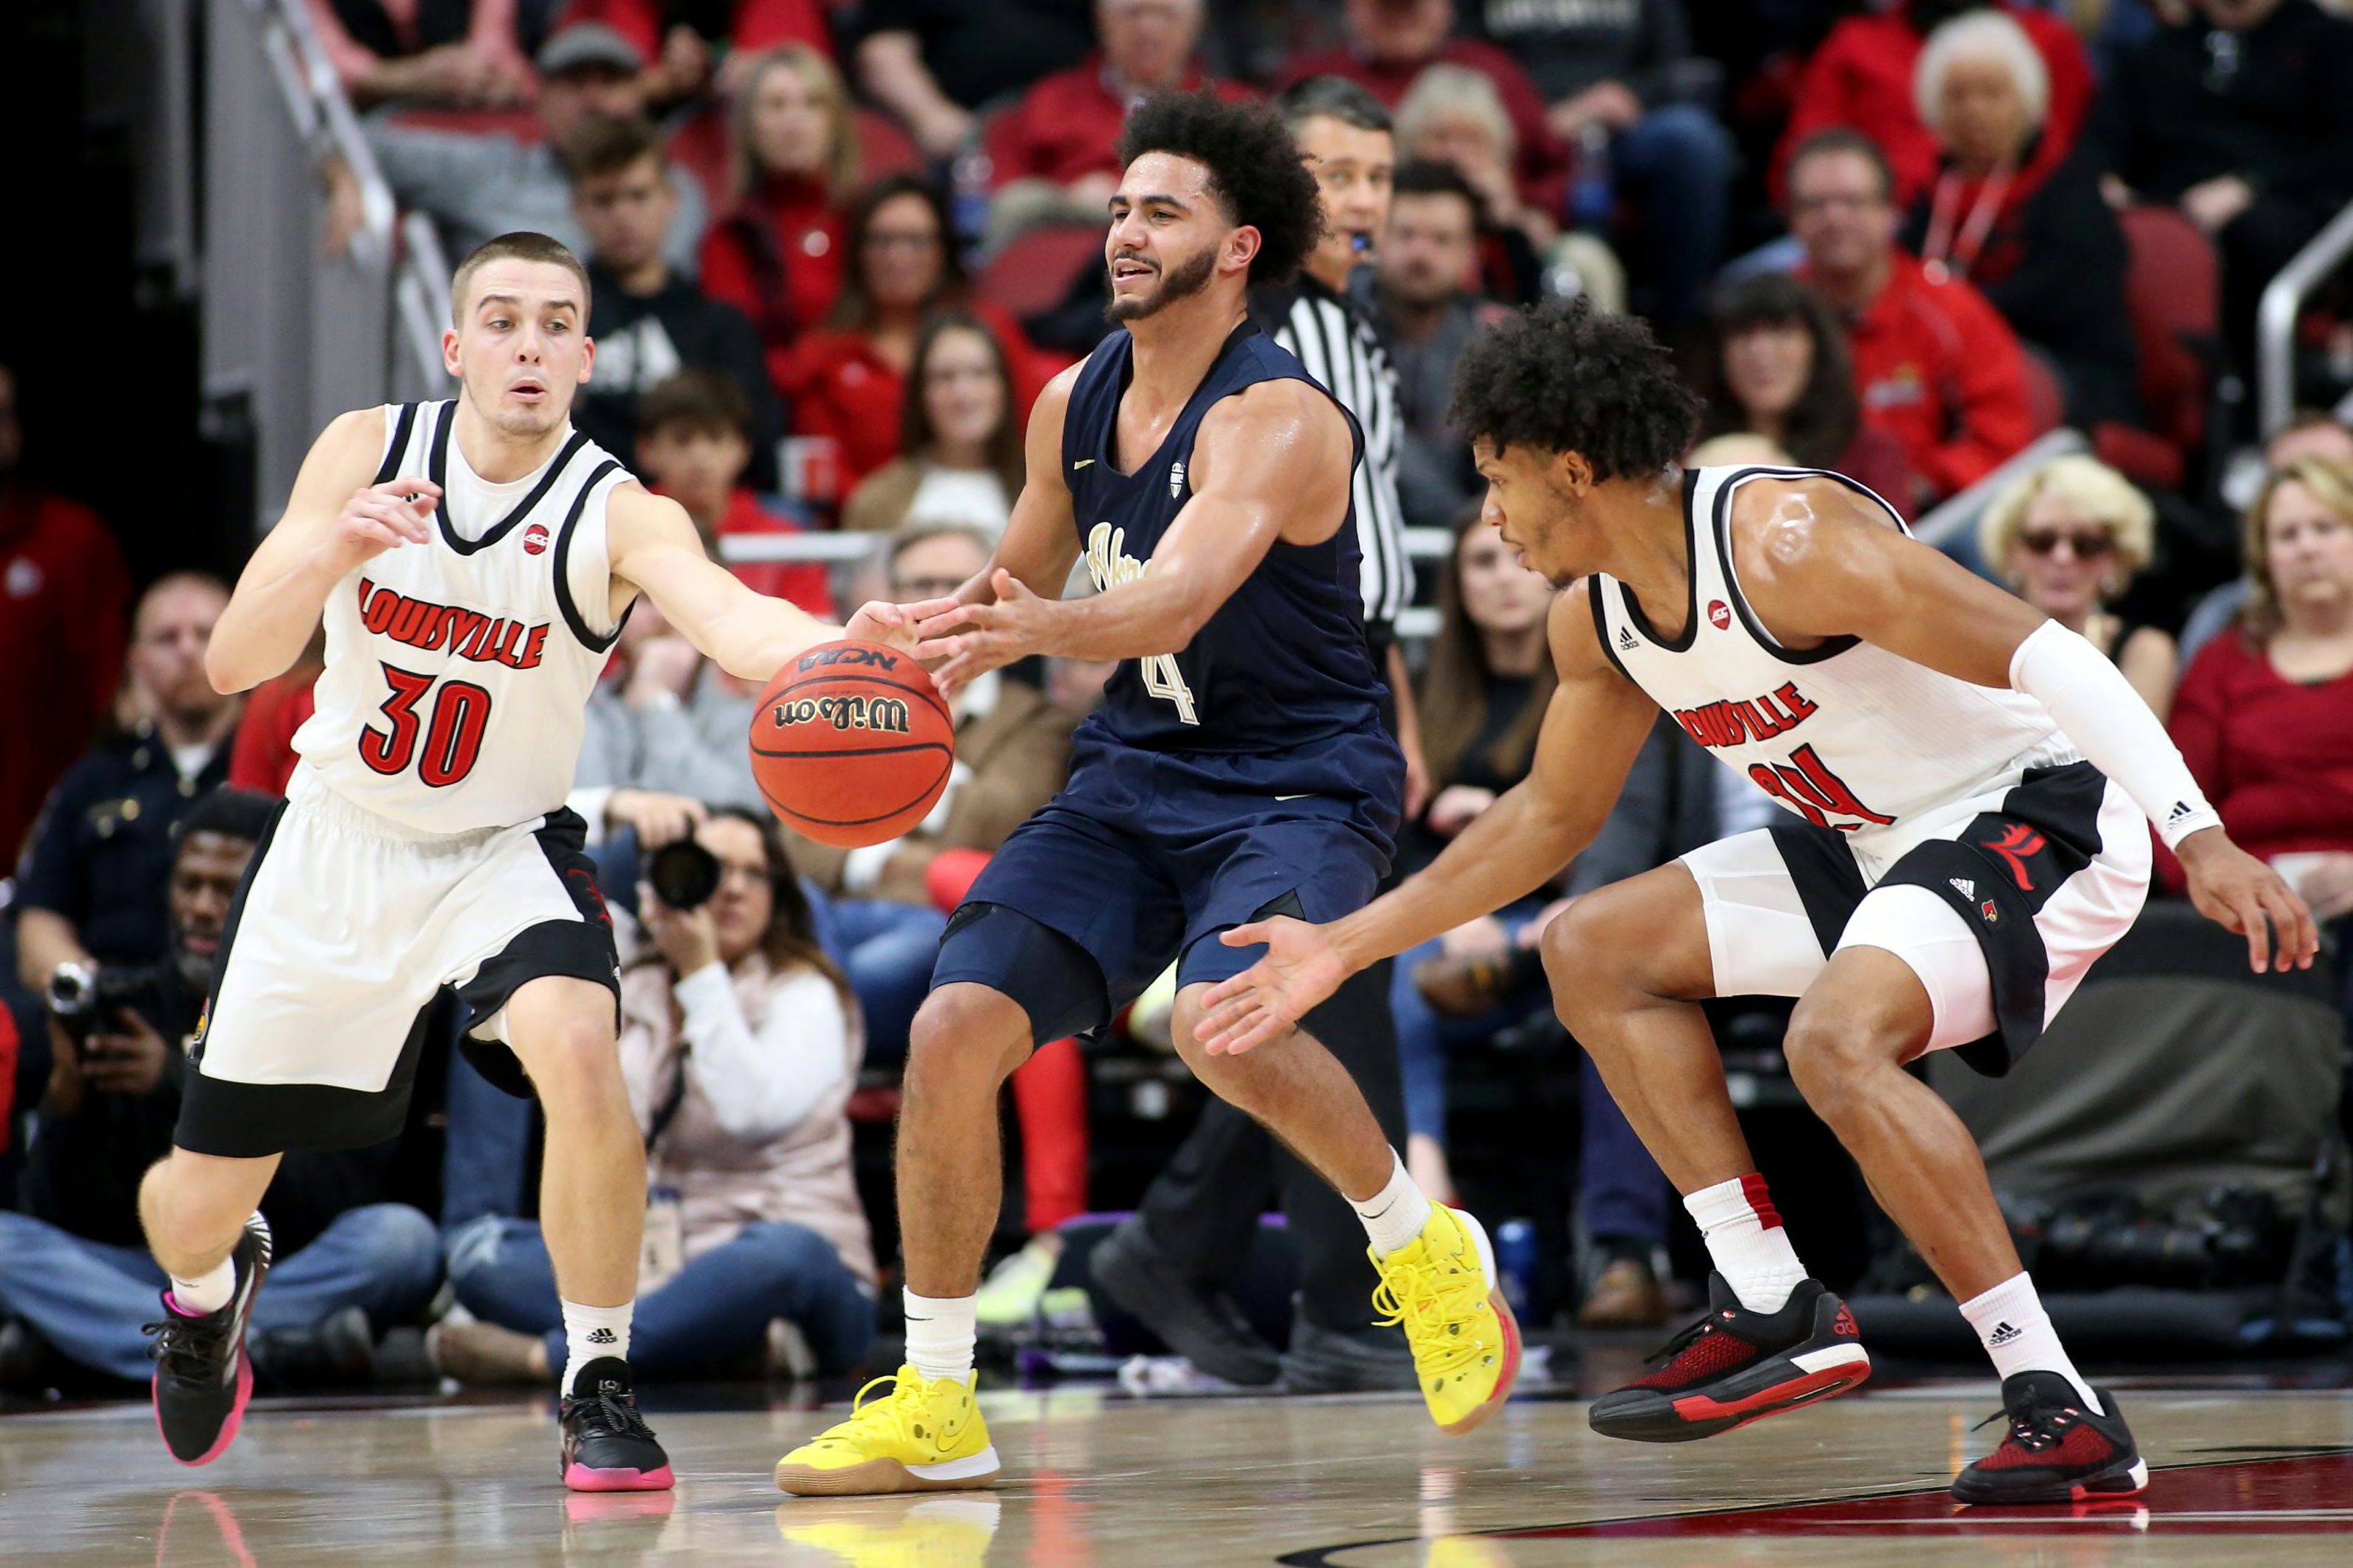 Louisville basketball: Cards vs. Western Kentucky game day central - Page 3